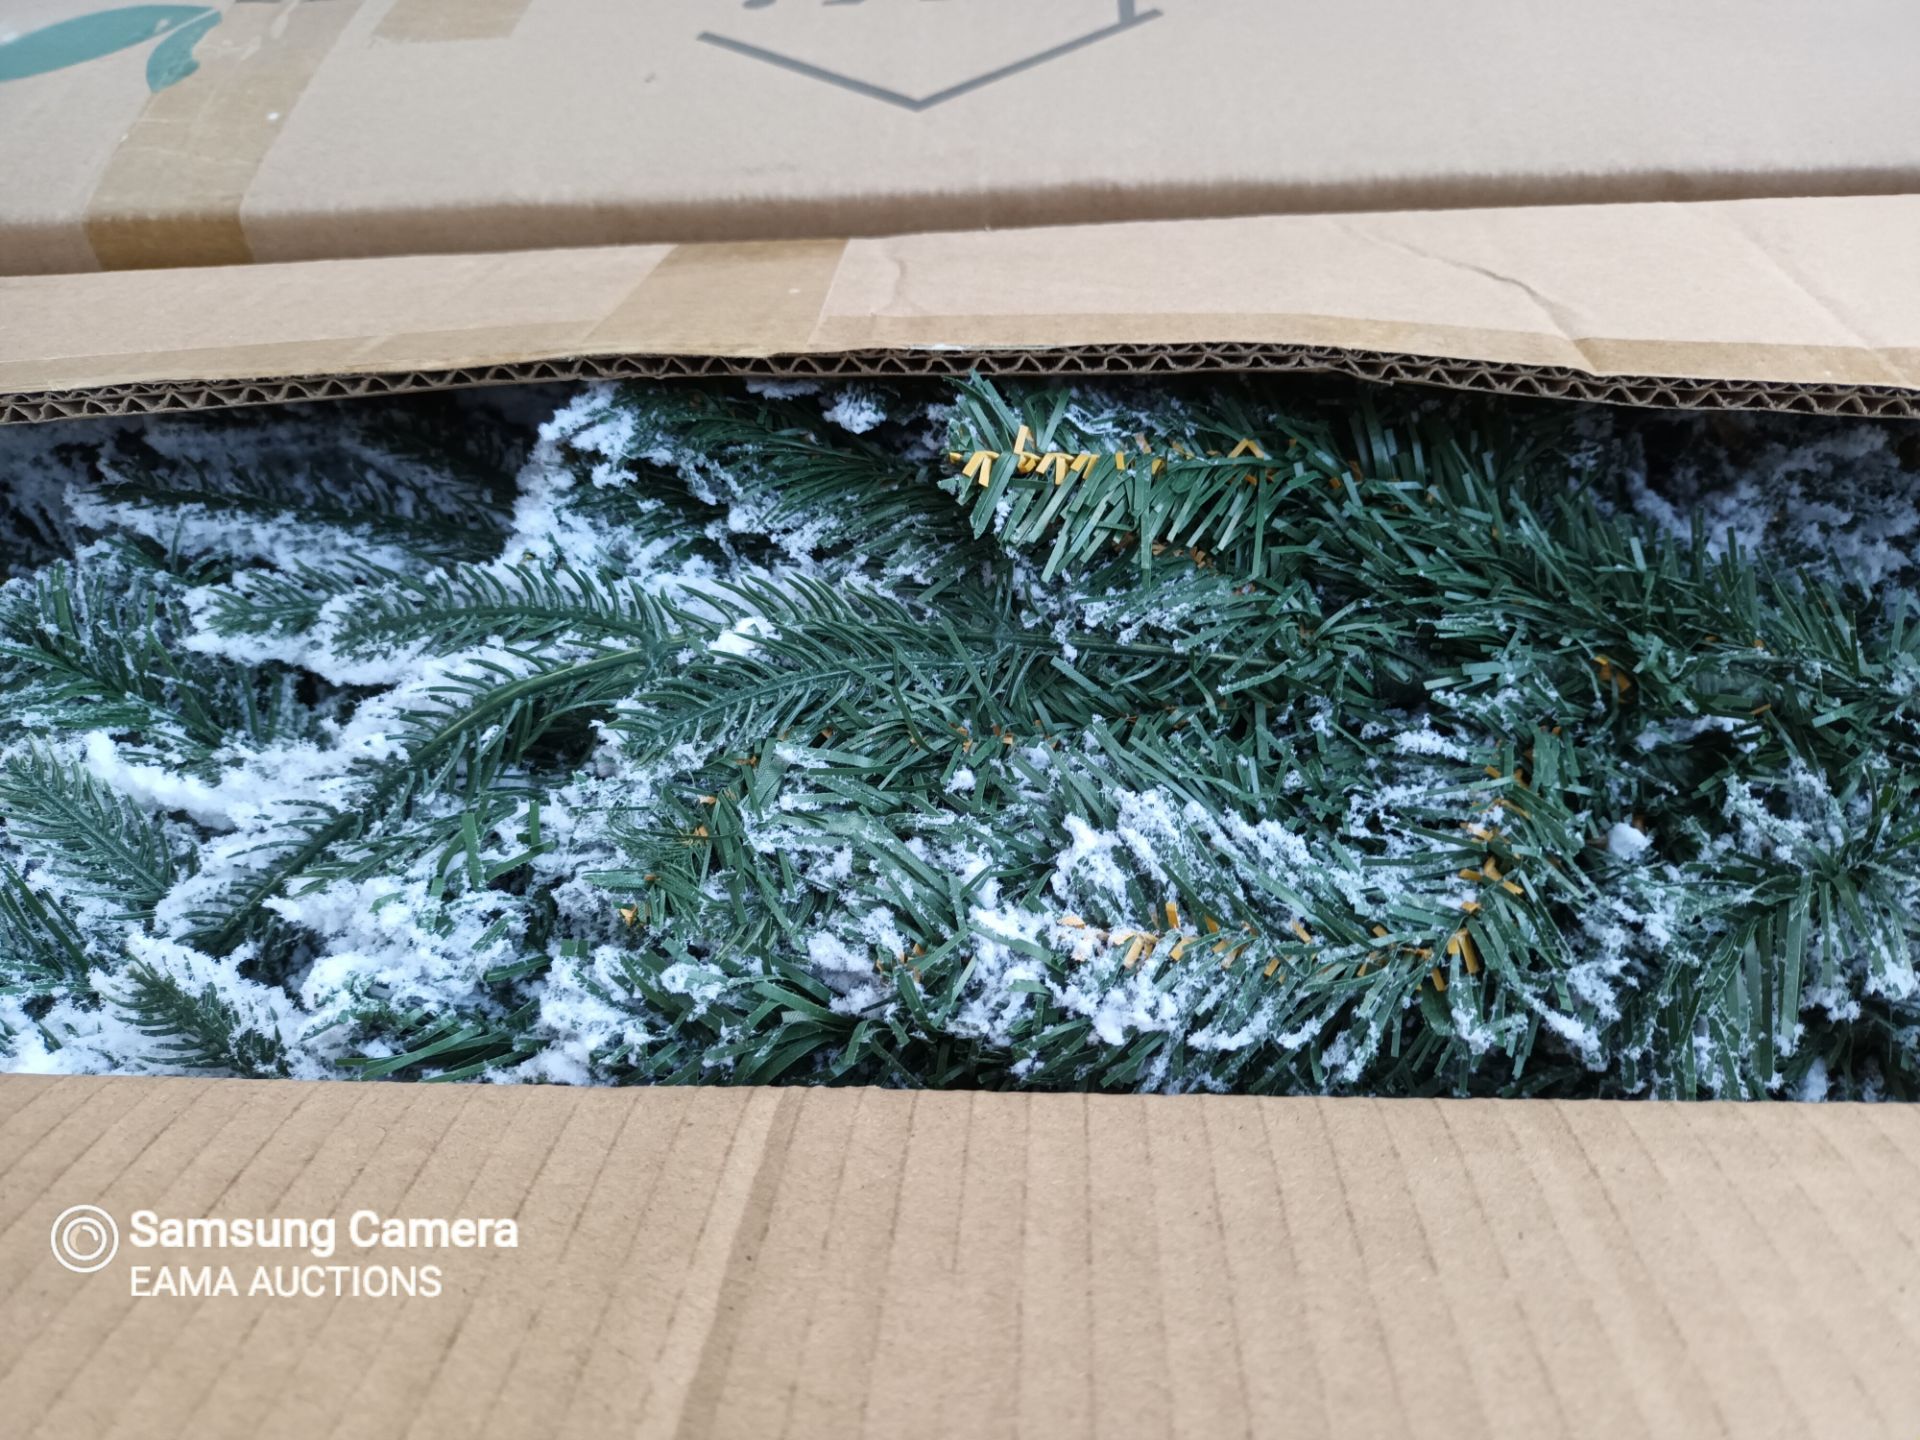 (L47) - 1 PALLET CONTAINING APPROX 28 BRAND NEW MICOZY GREEN CHRISTMAS TREES WITH SNOW EFFECT